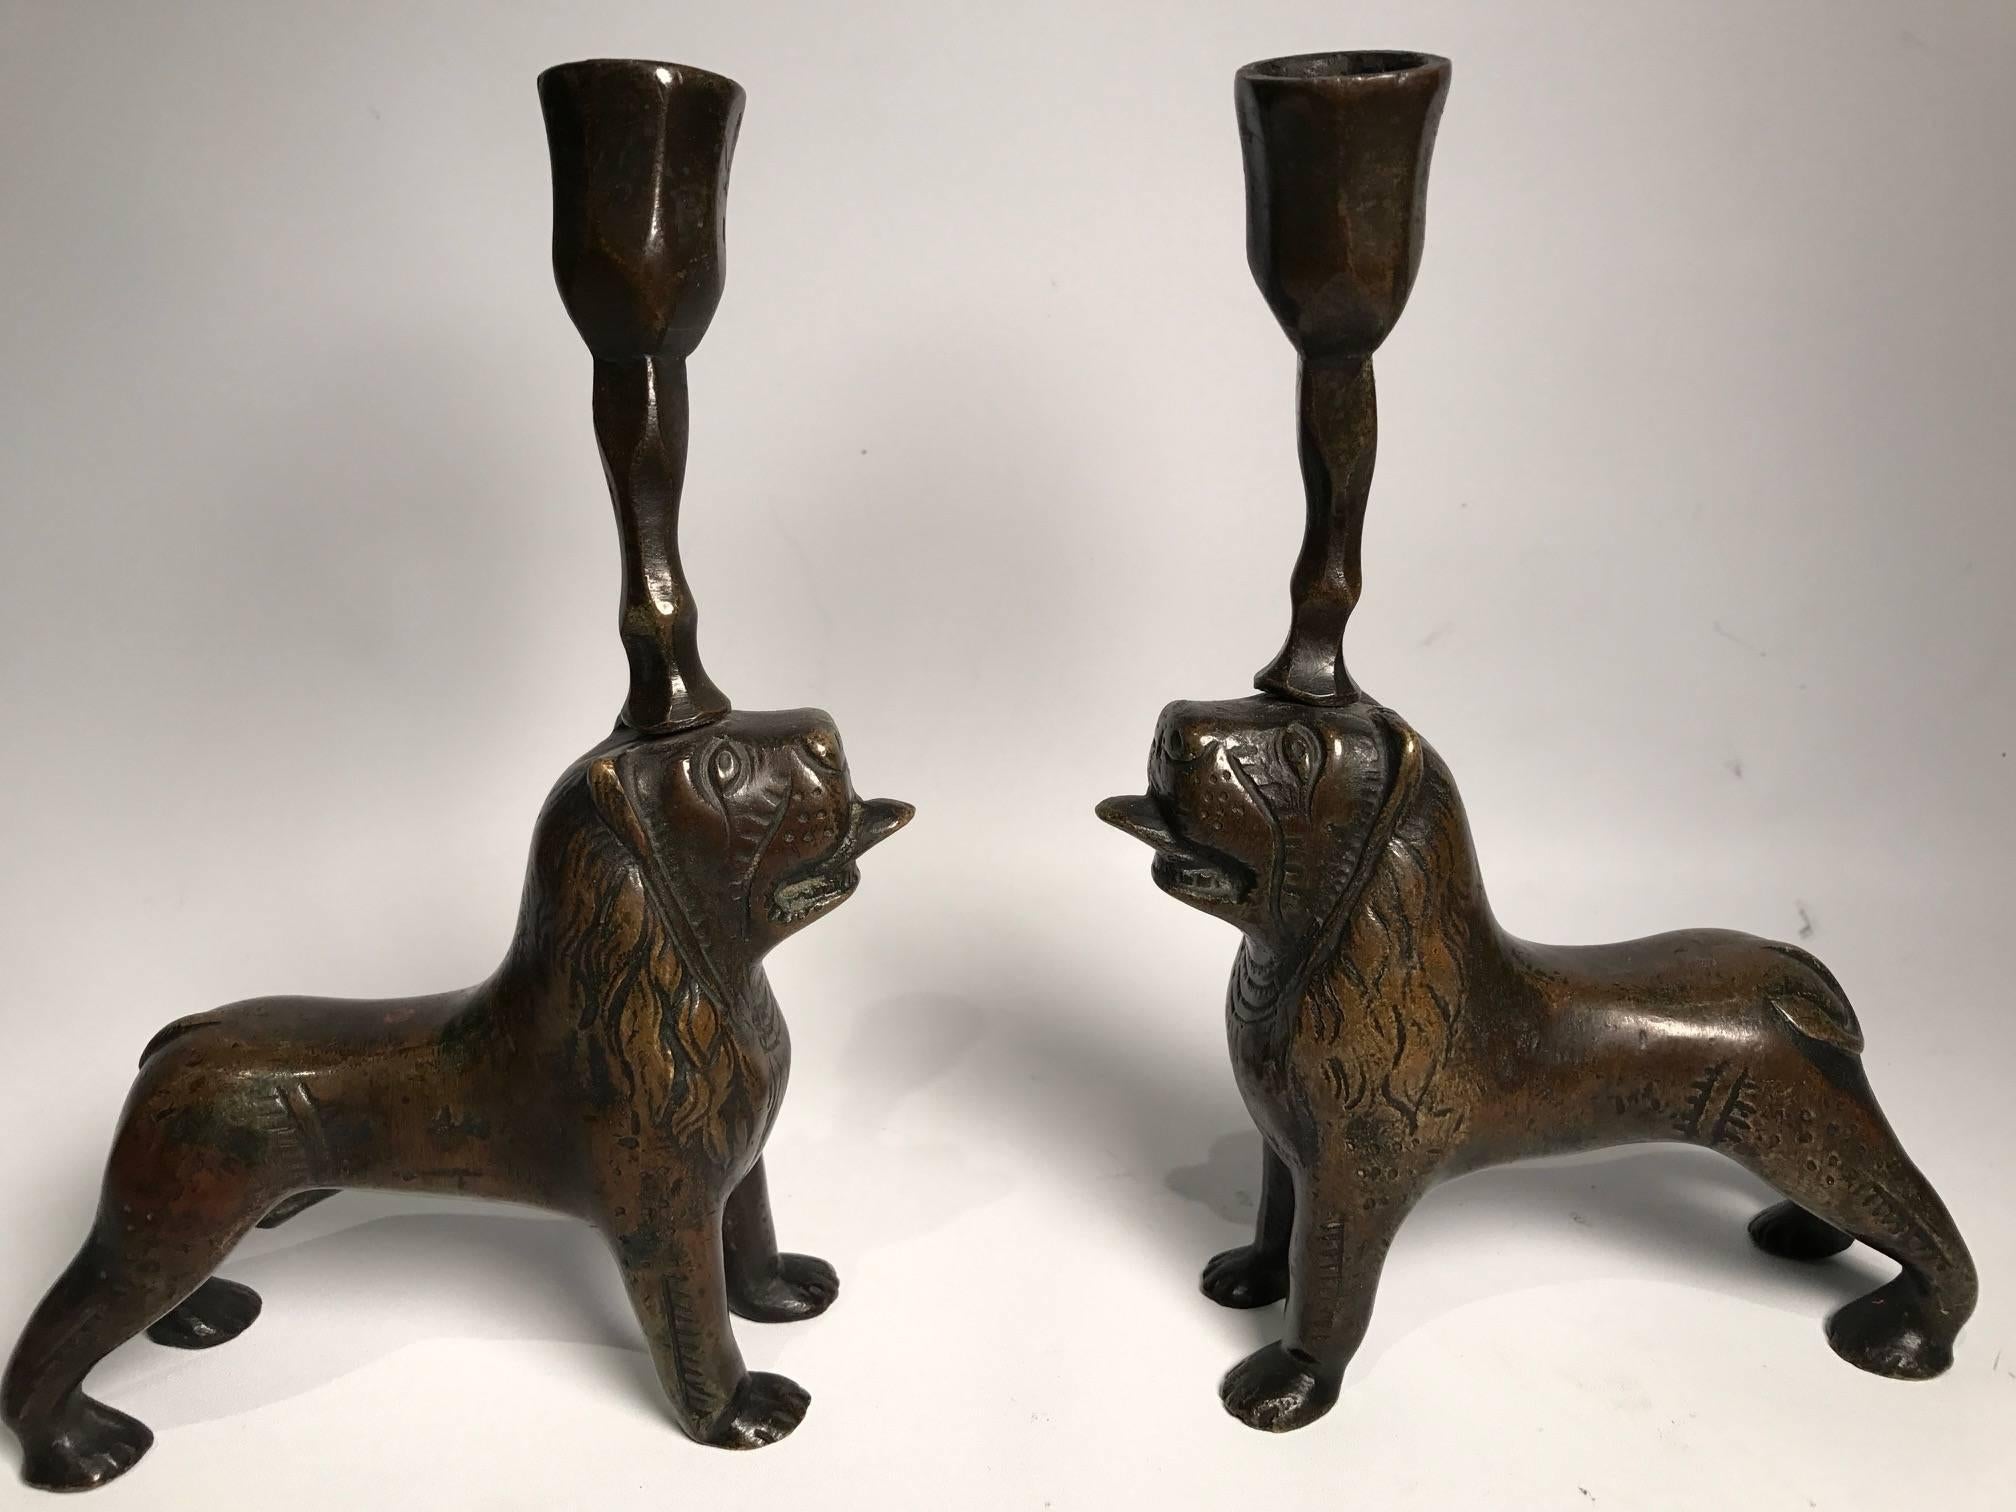 A pair of continental 19th century beautifully patinated bronze lion candlesticks, stylistically in the form of architectural pillar holders know as stylobates, typically seen in the Romanesque cathedrals of Italy, such as Saint Alessandro in